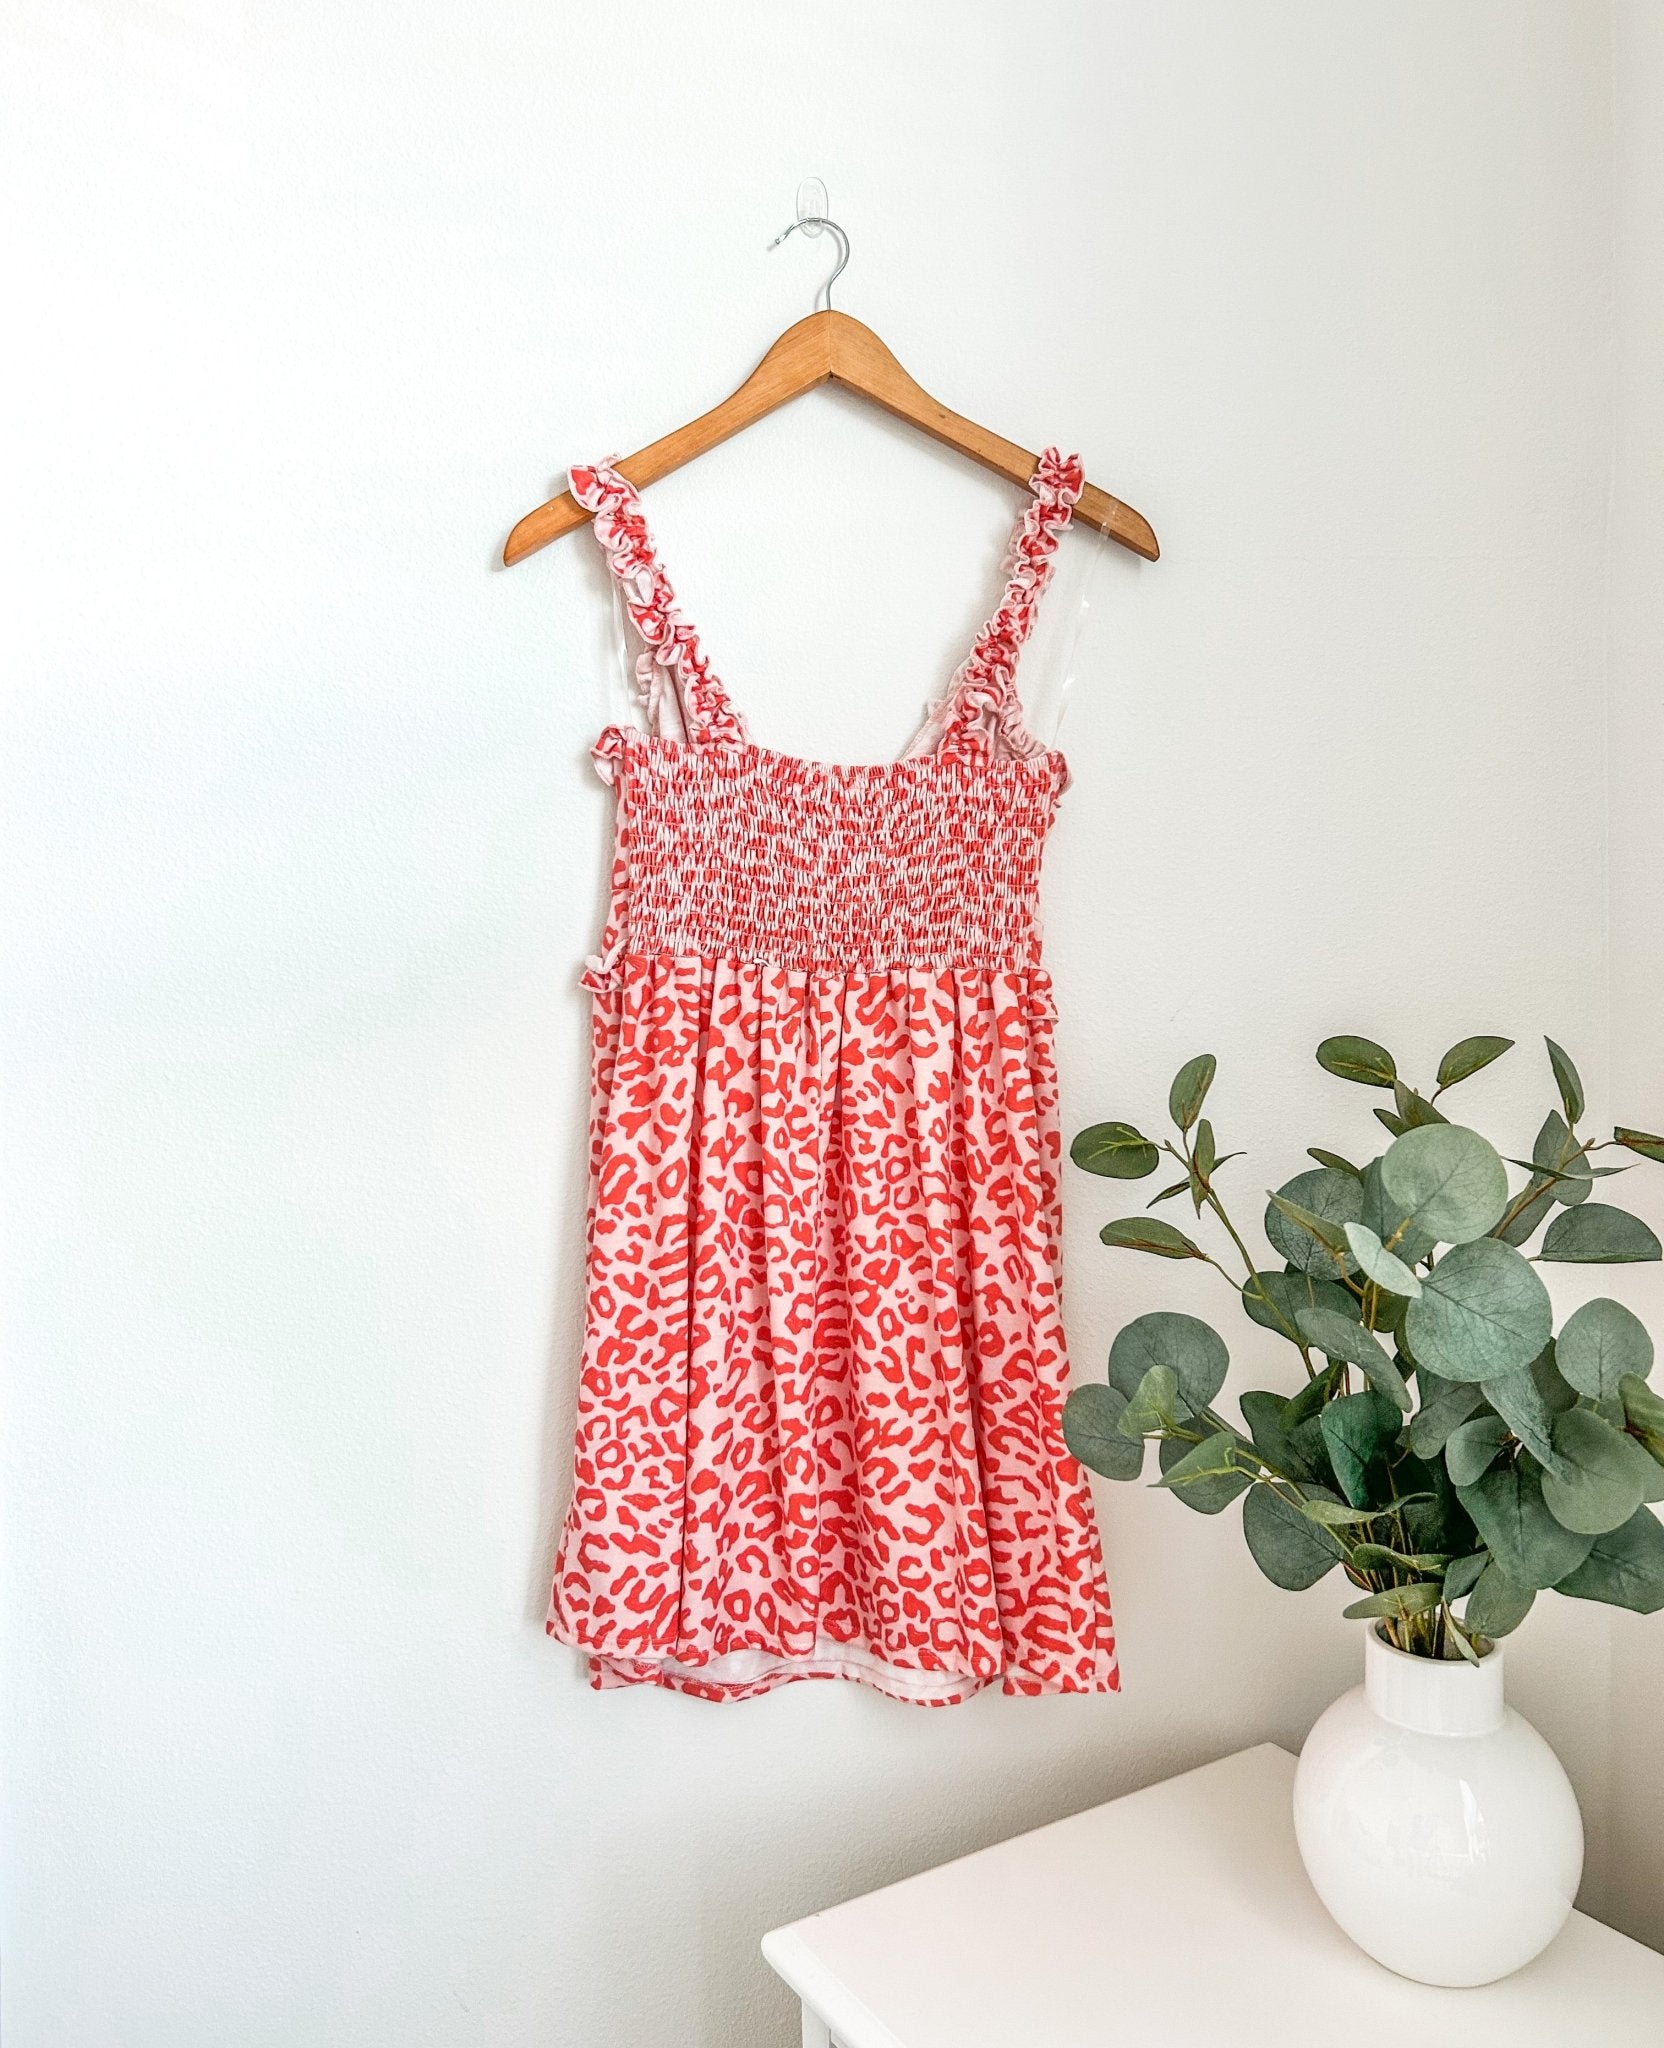 The Peachy Pink Dress - Styled by Ashley Brooke